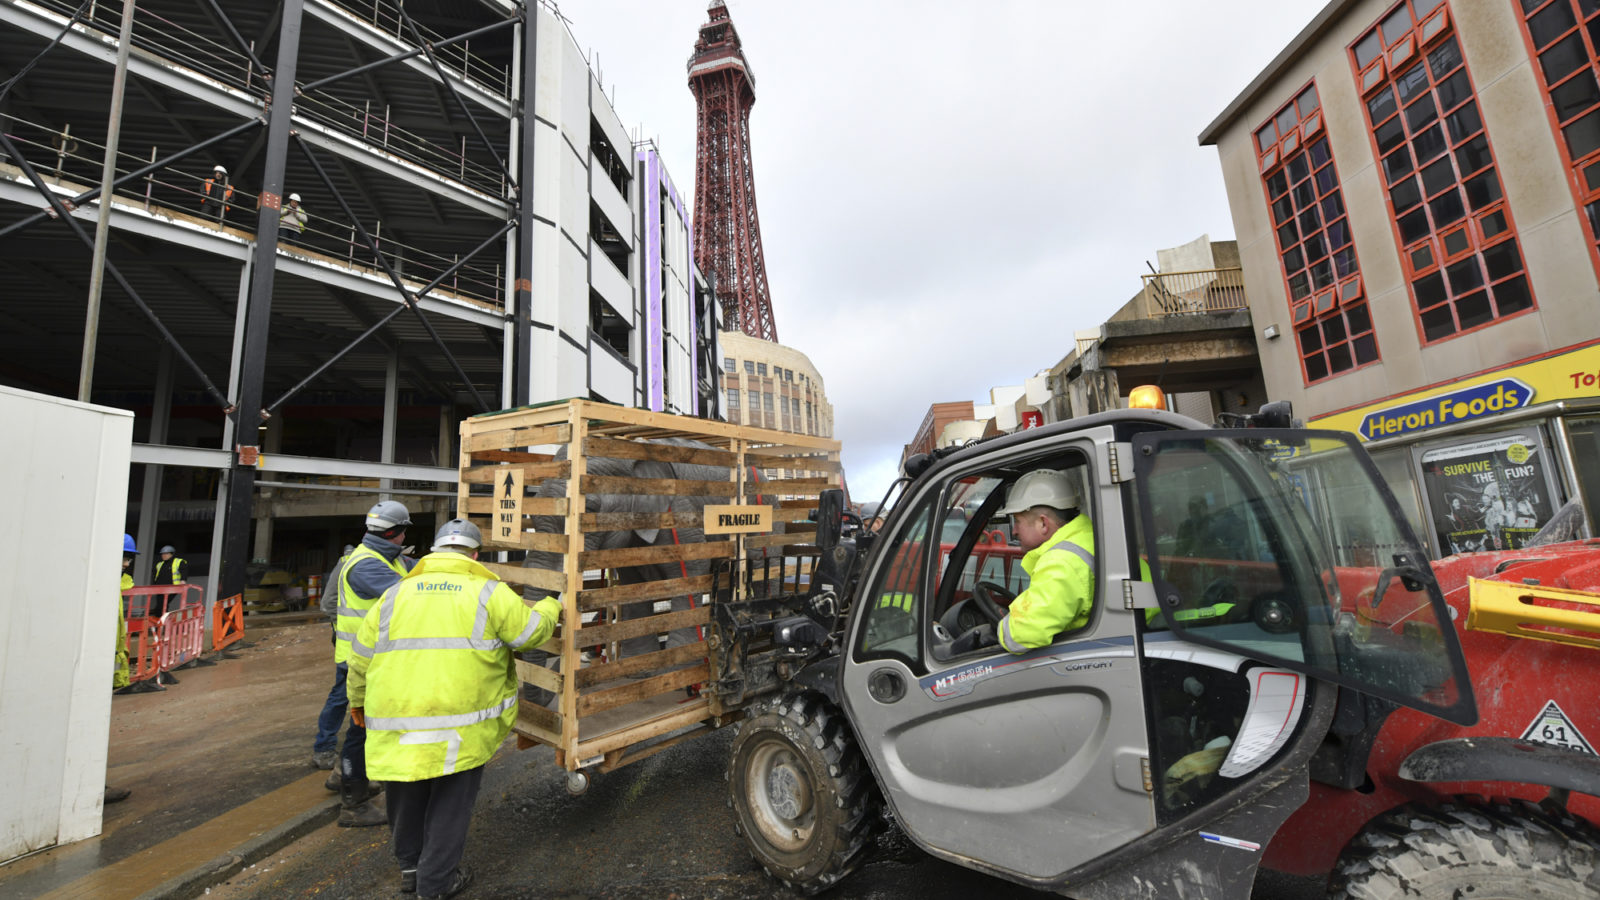 A crate containing a model elephant being lifted in front of the Showtown site